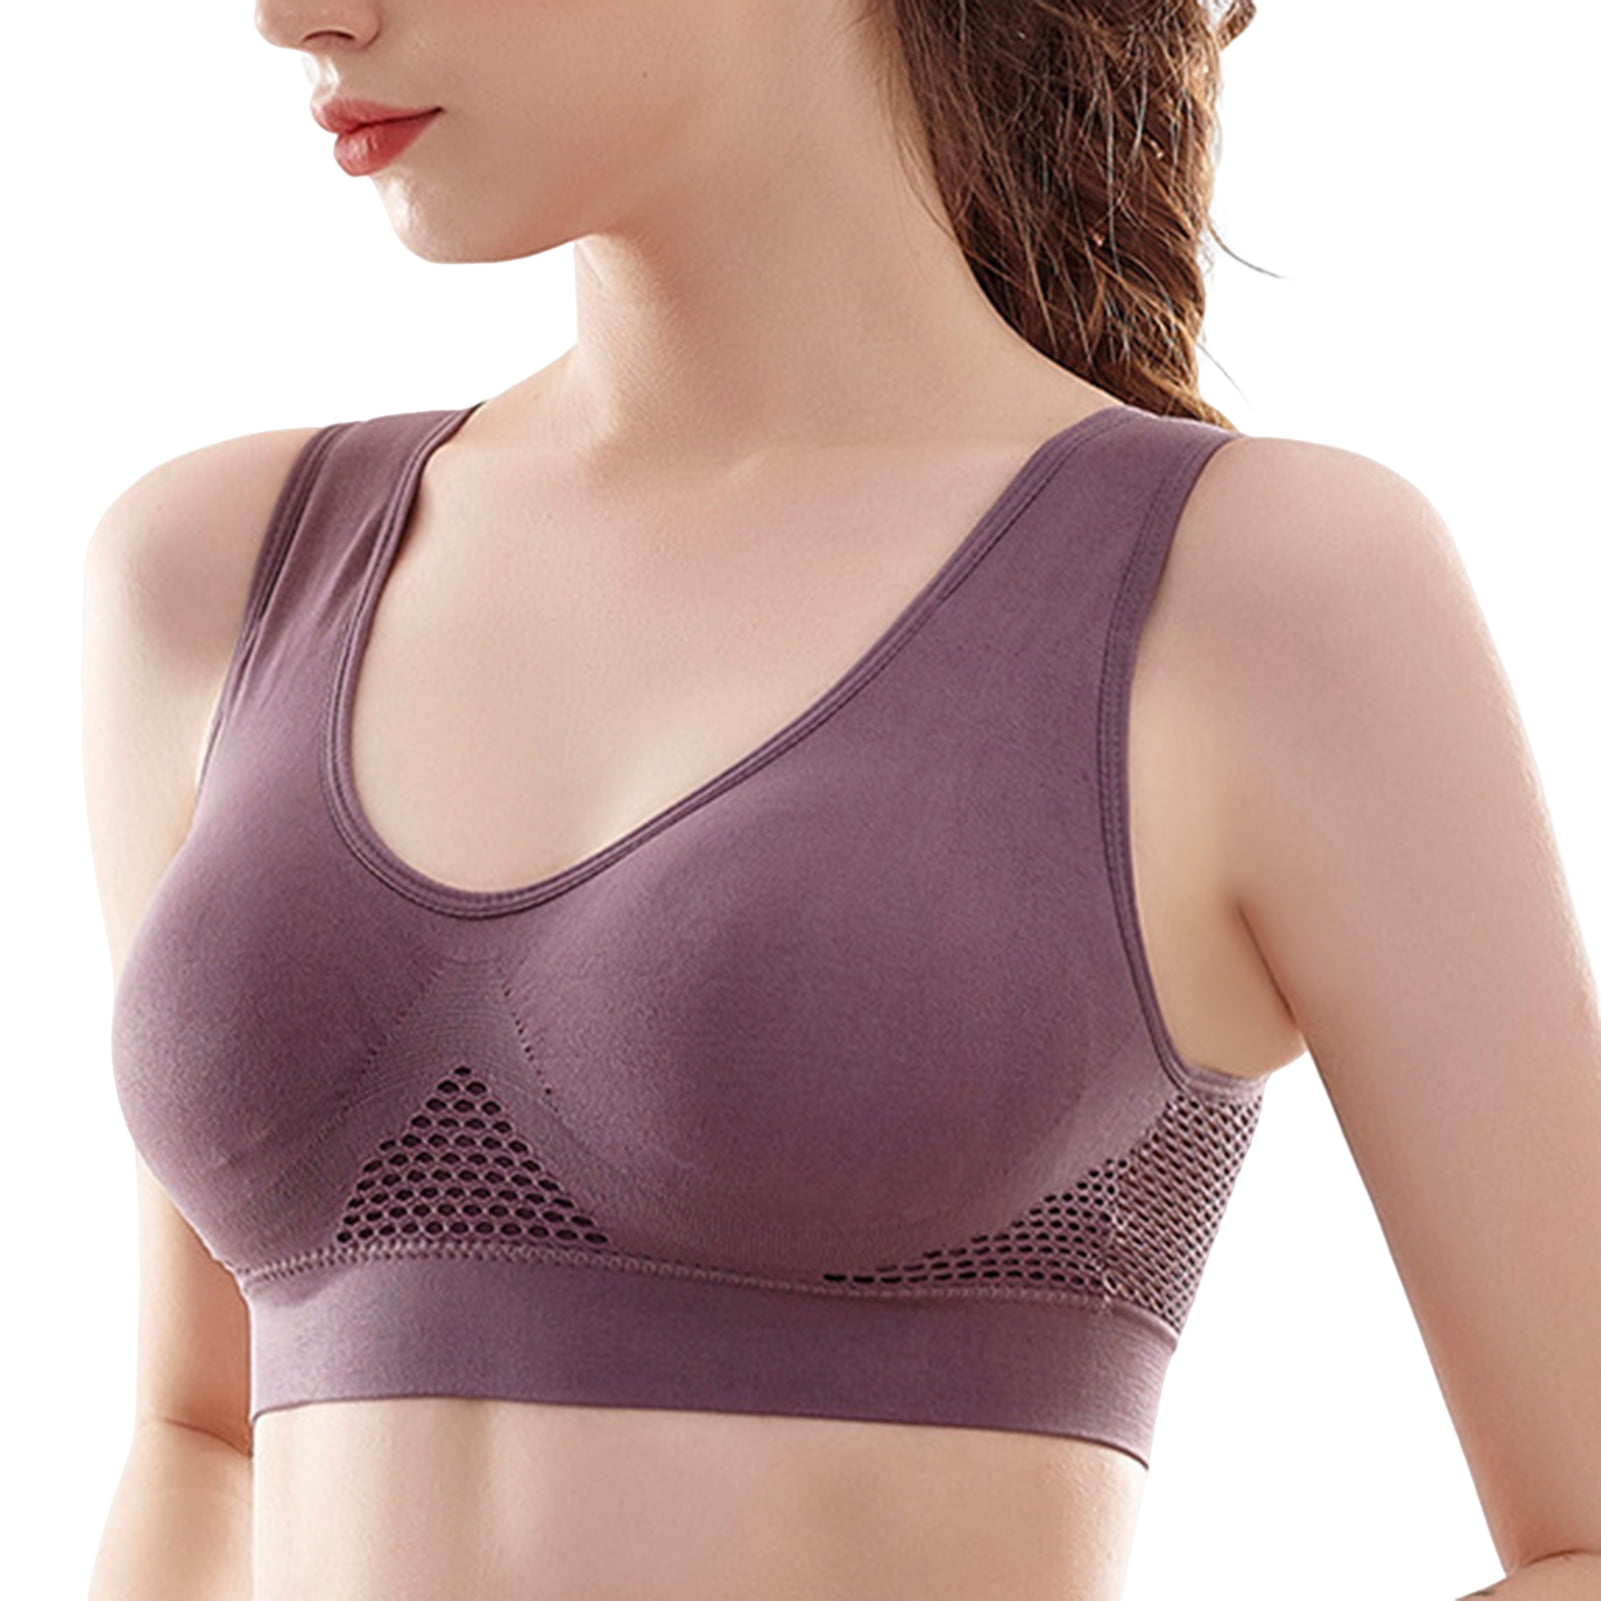 harmtty Sports Bra Hollow Out Thin Padded Intimacy Comfortable Breathable  Solid Color Breast Support U-shaped Back Women Bras Inner Wear Garment,Skin  Color 